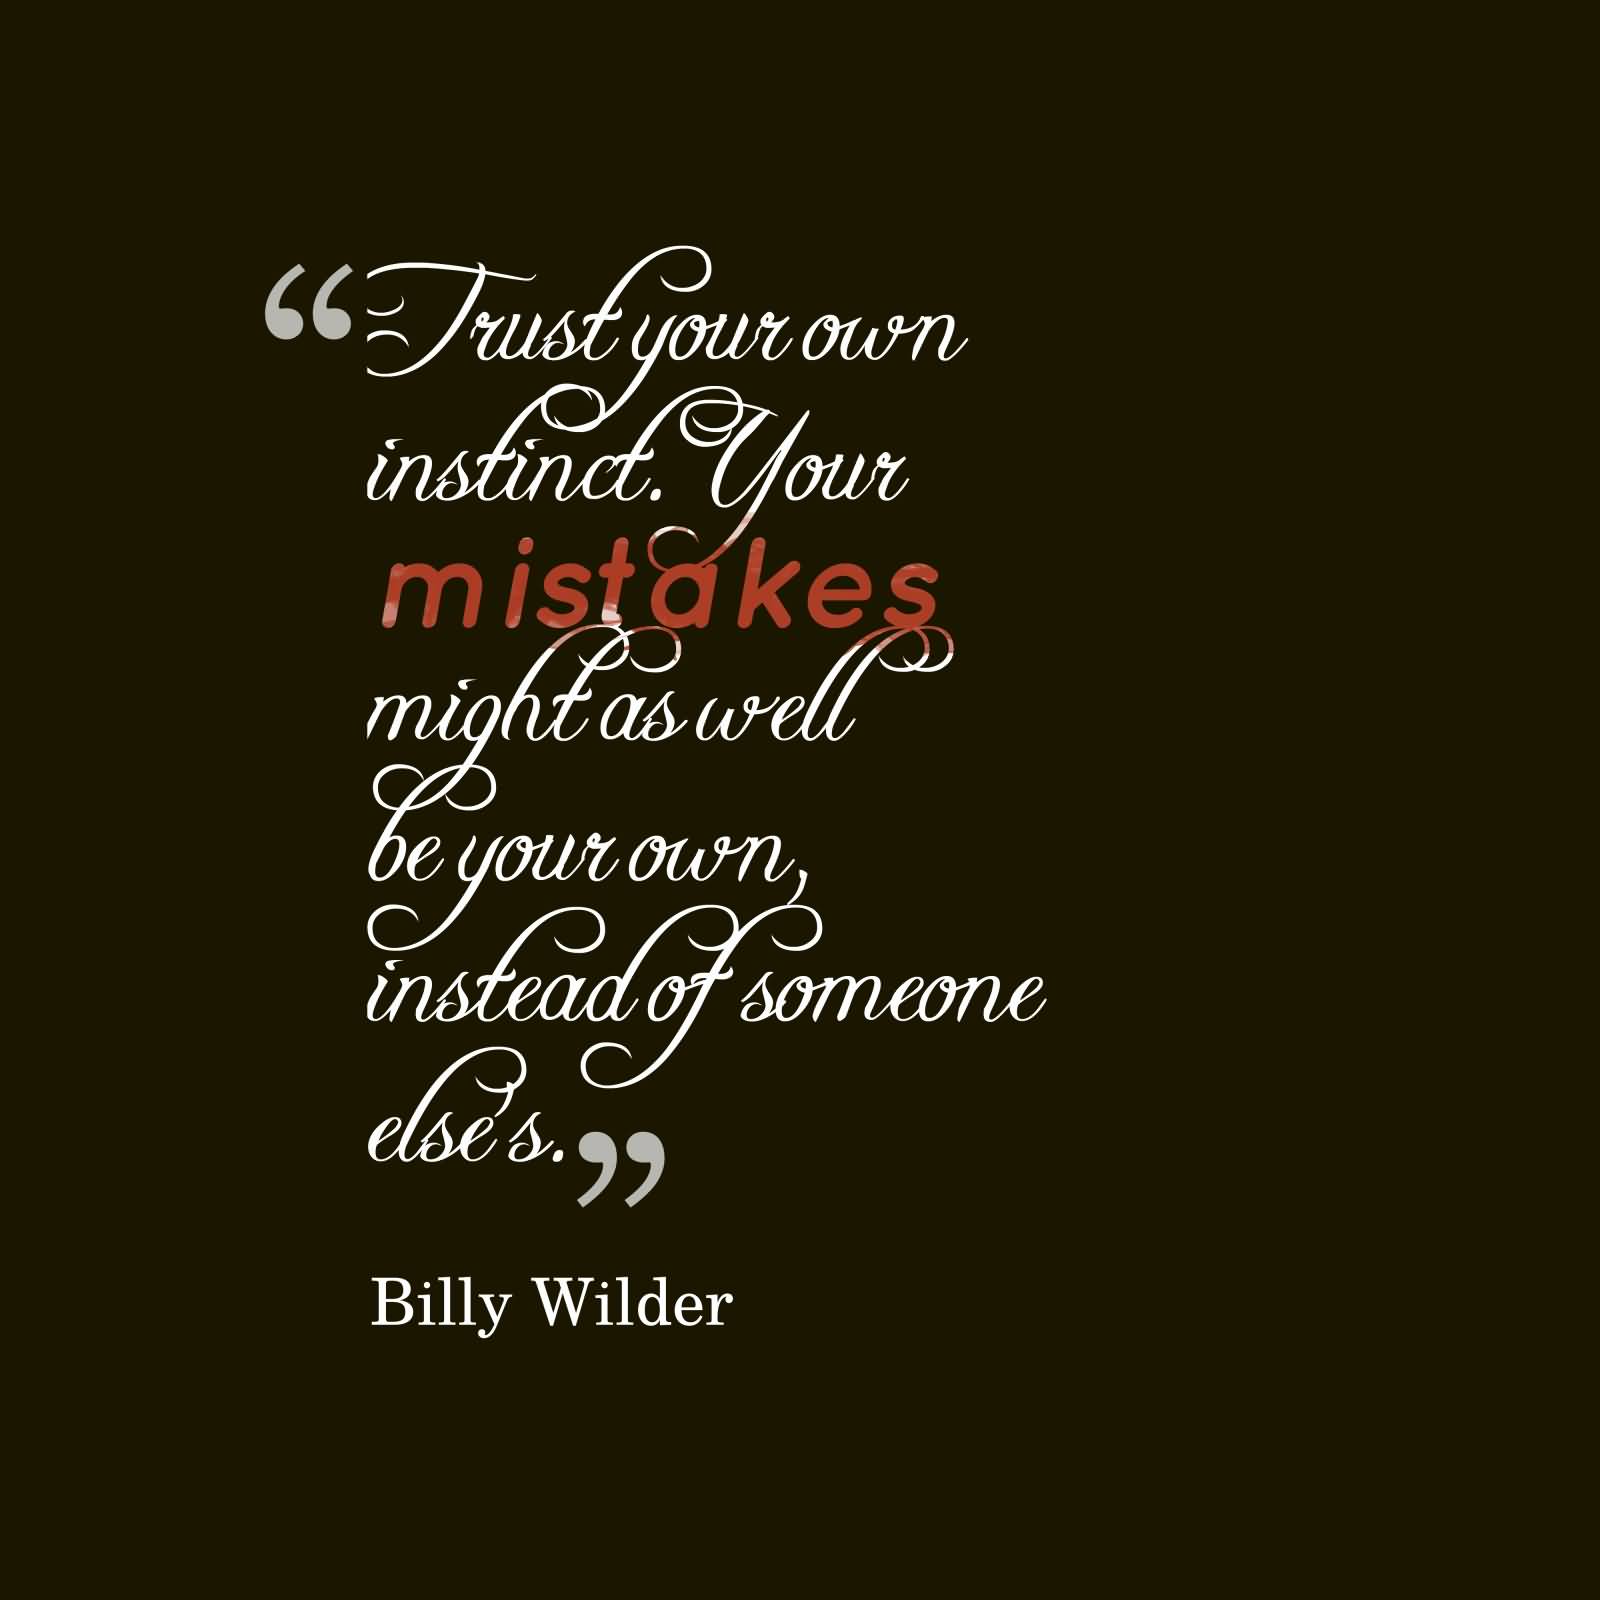 Trust your own instinct. Your mistakes might as well be your own, instead of someone else's - Billy Wilder